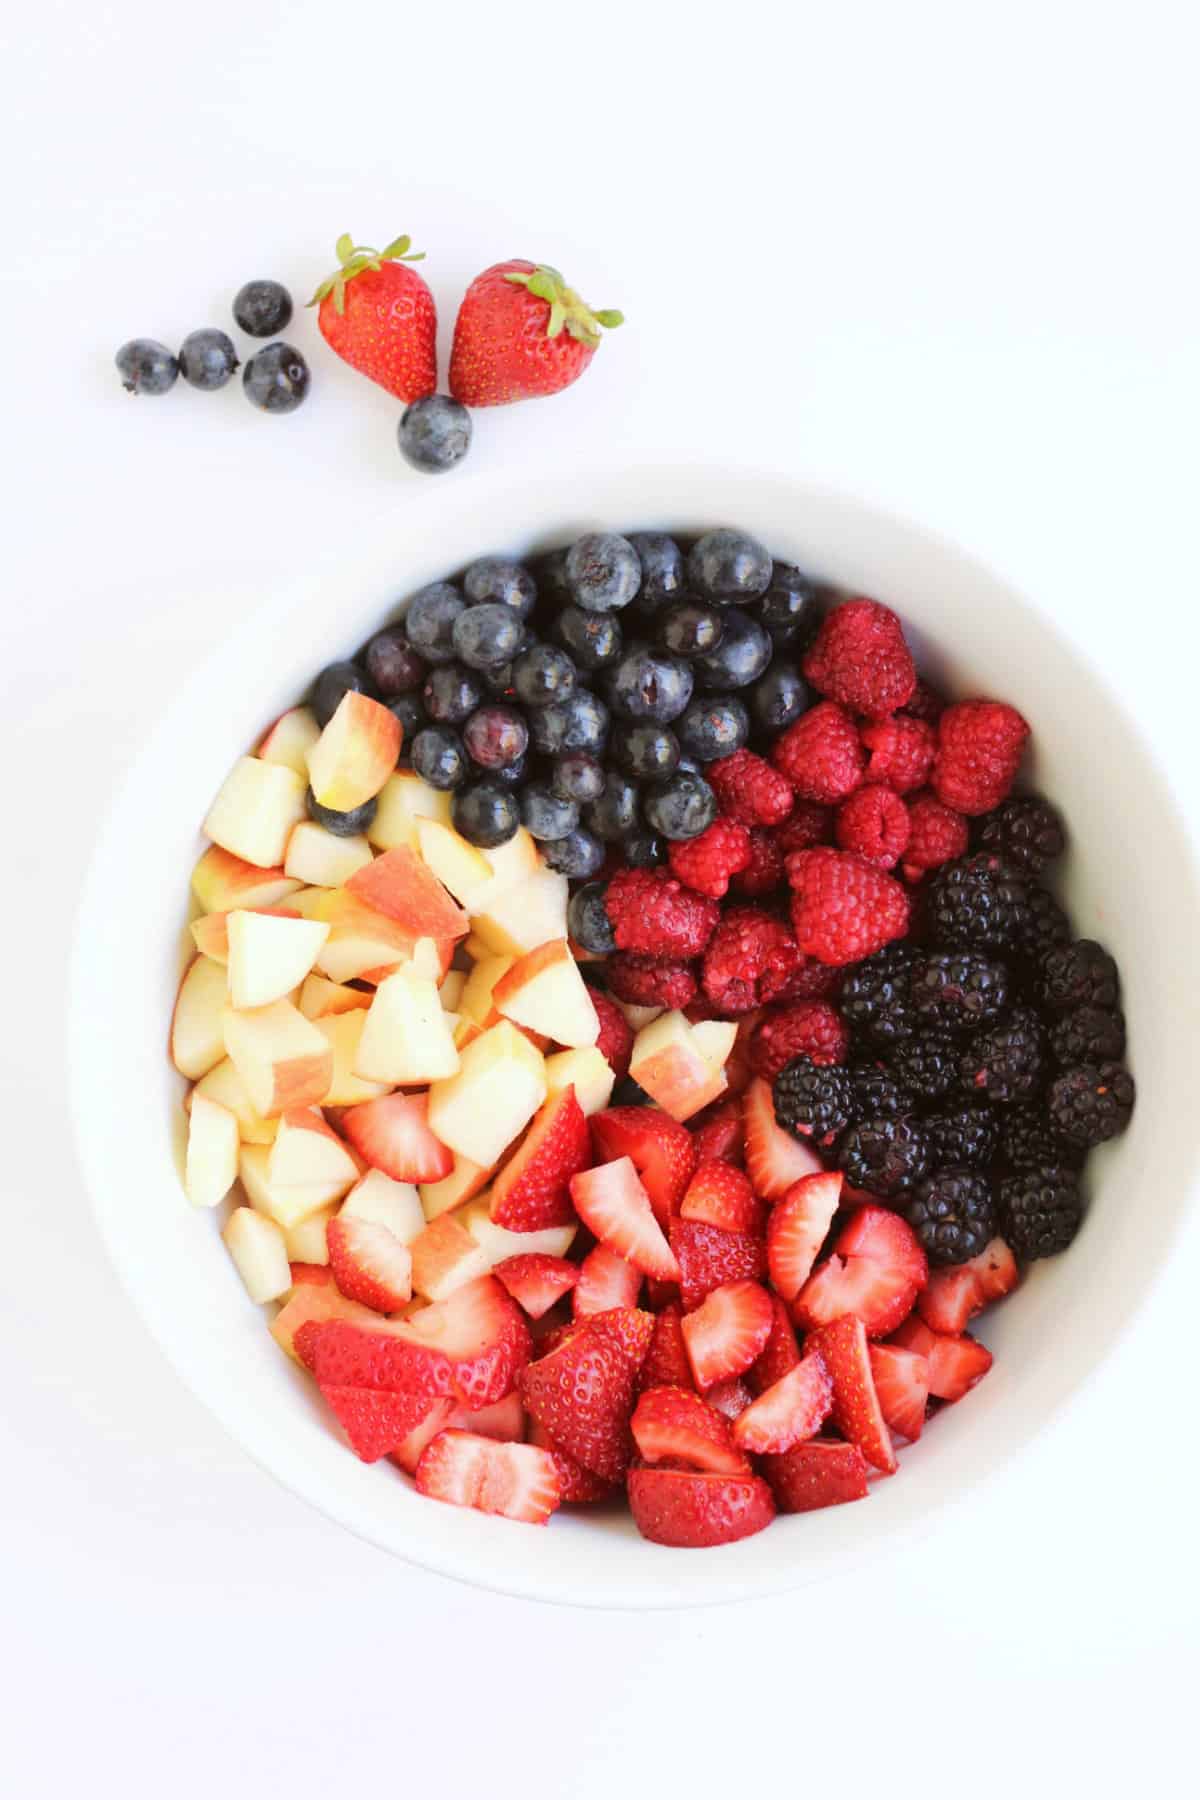 white bowl of diced apples and strawberries, and whole blueberries, raspberries, and blackberries.